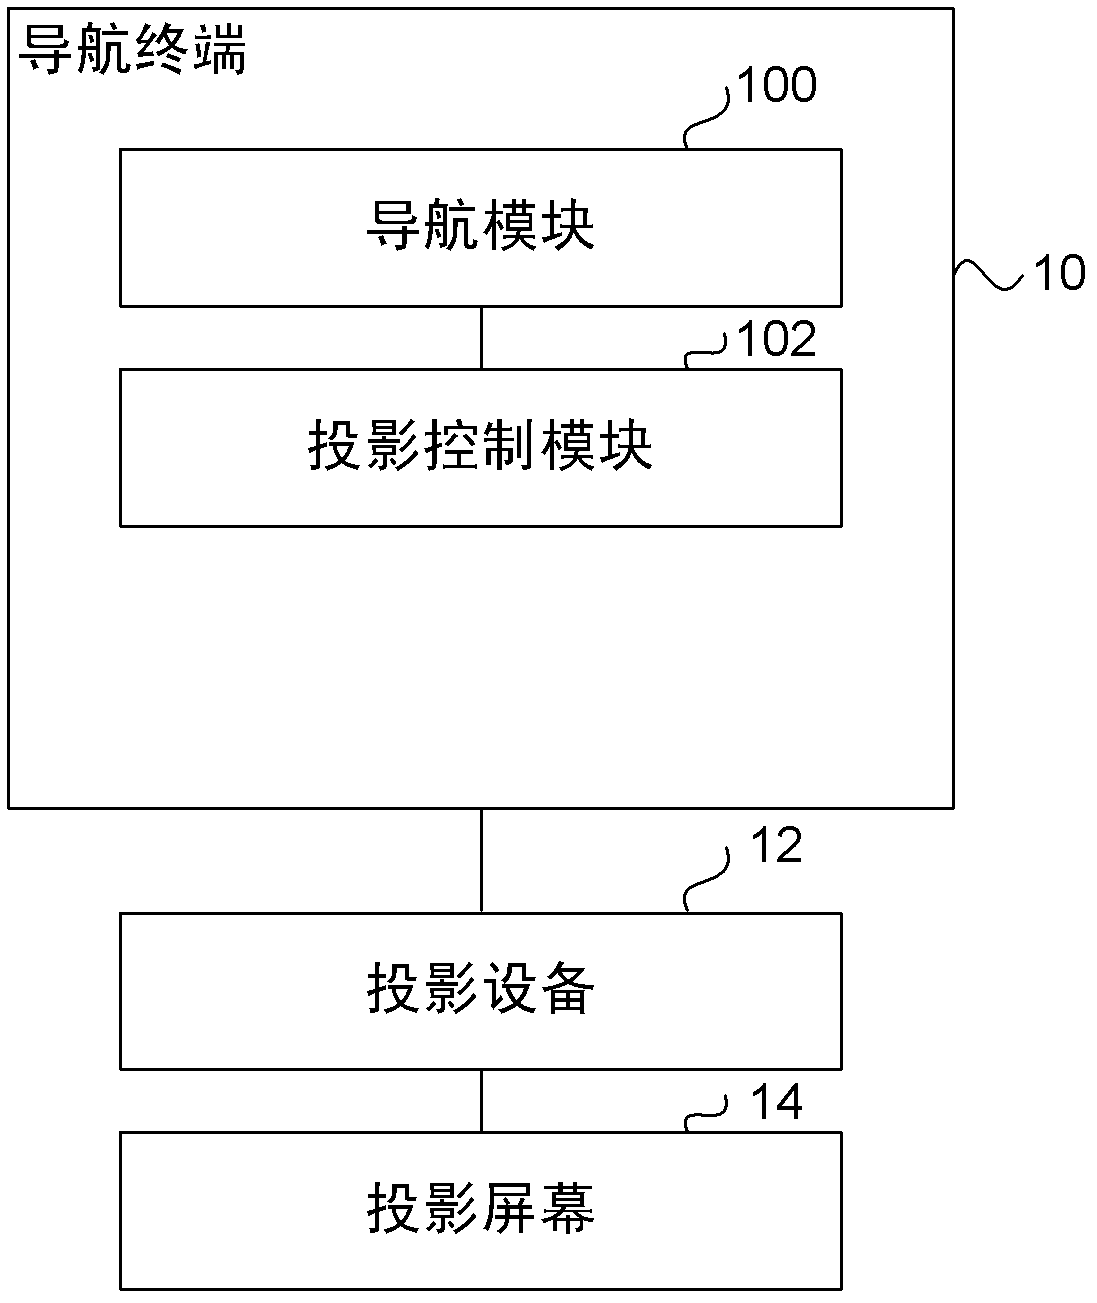 Navigation system and method employing front window projection of car